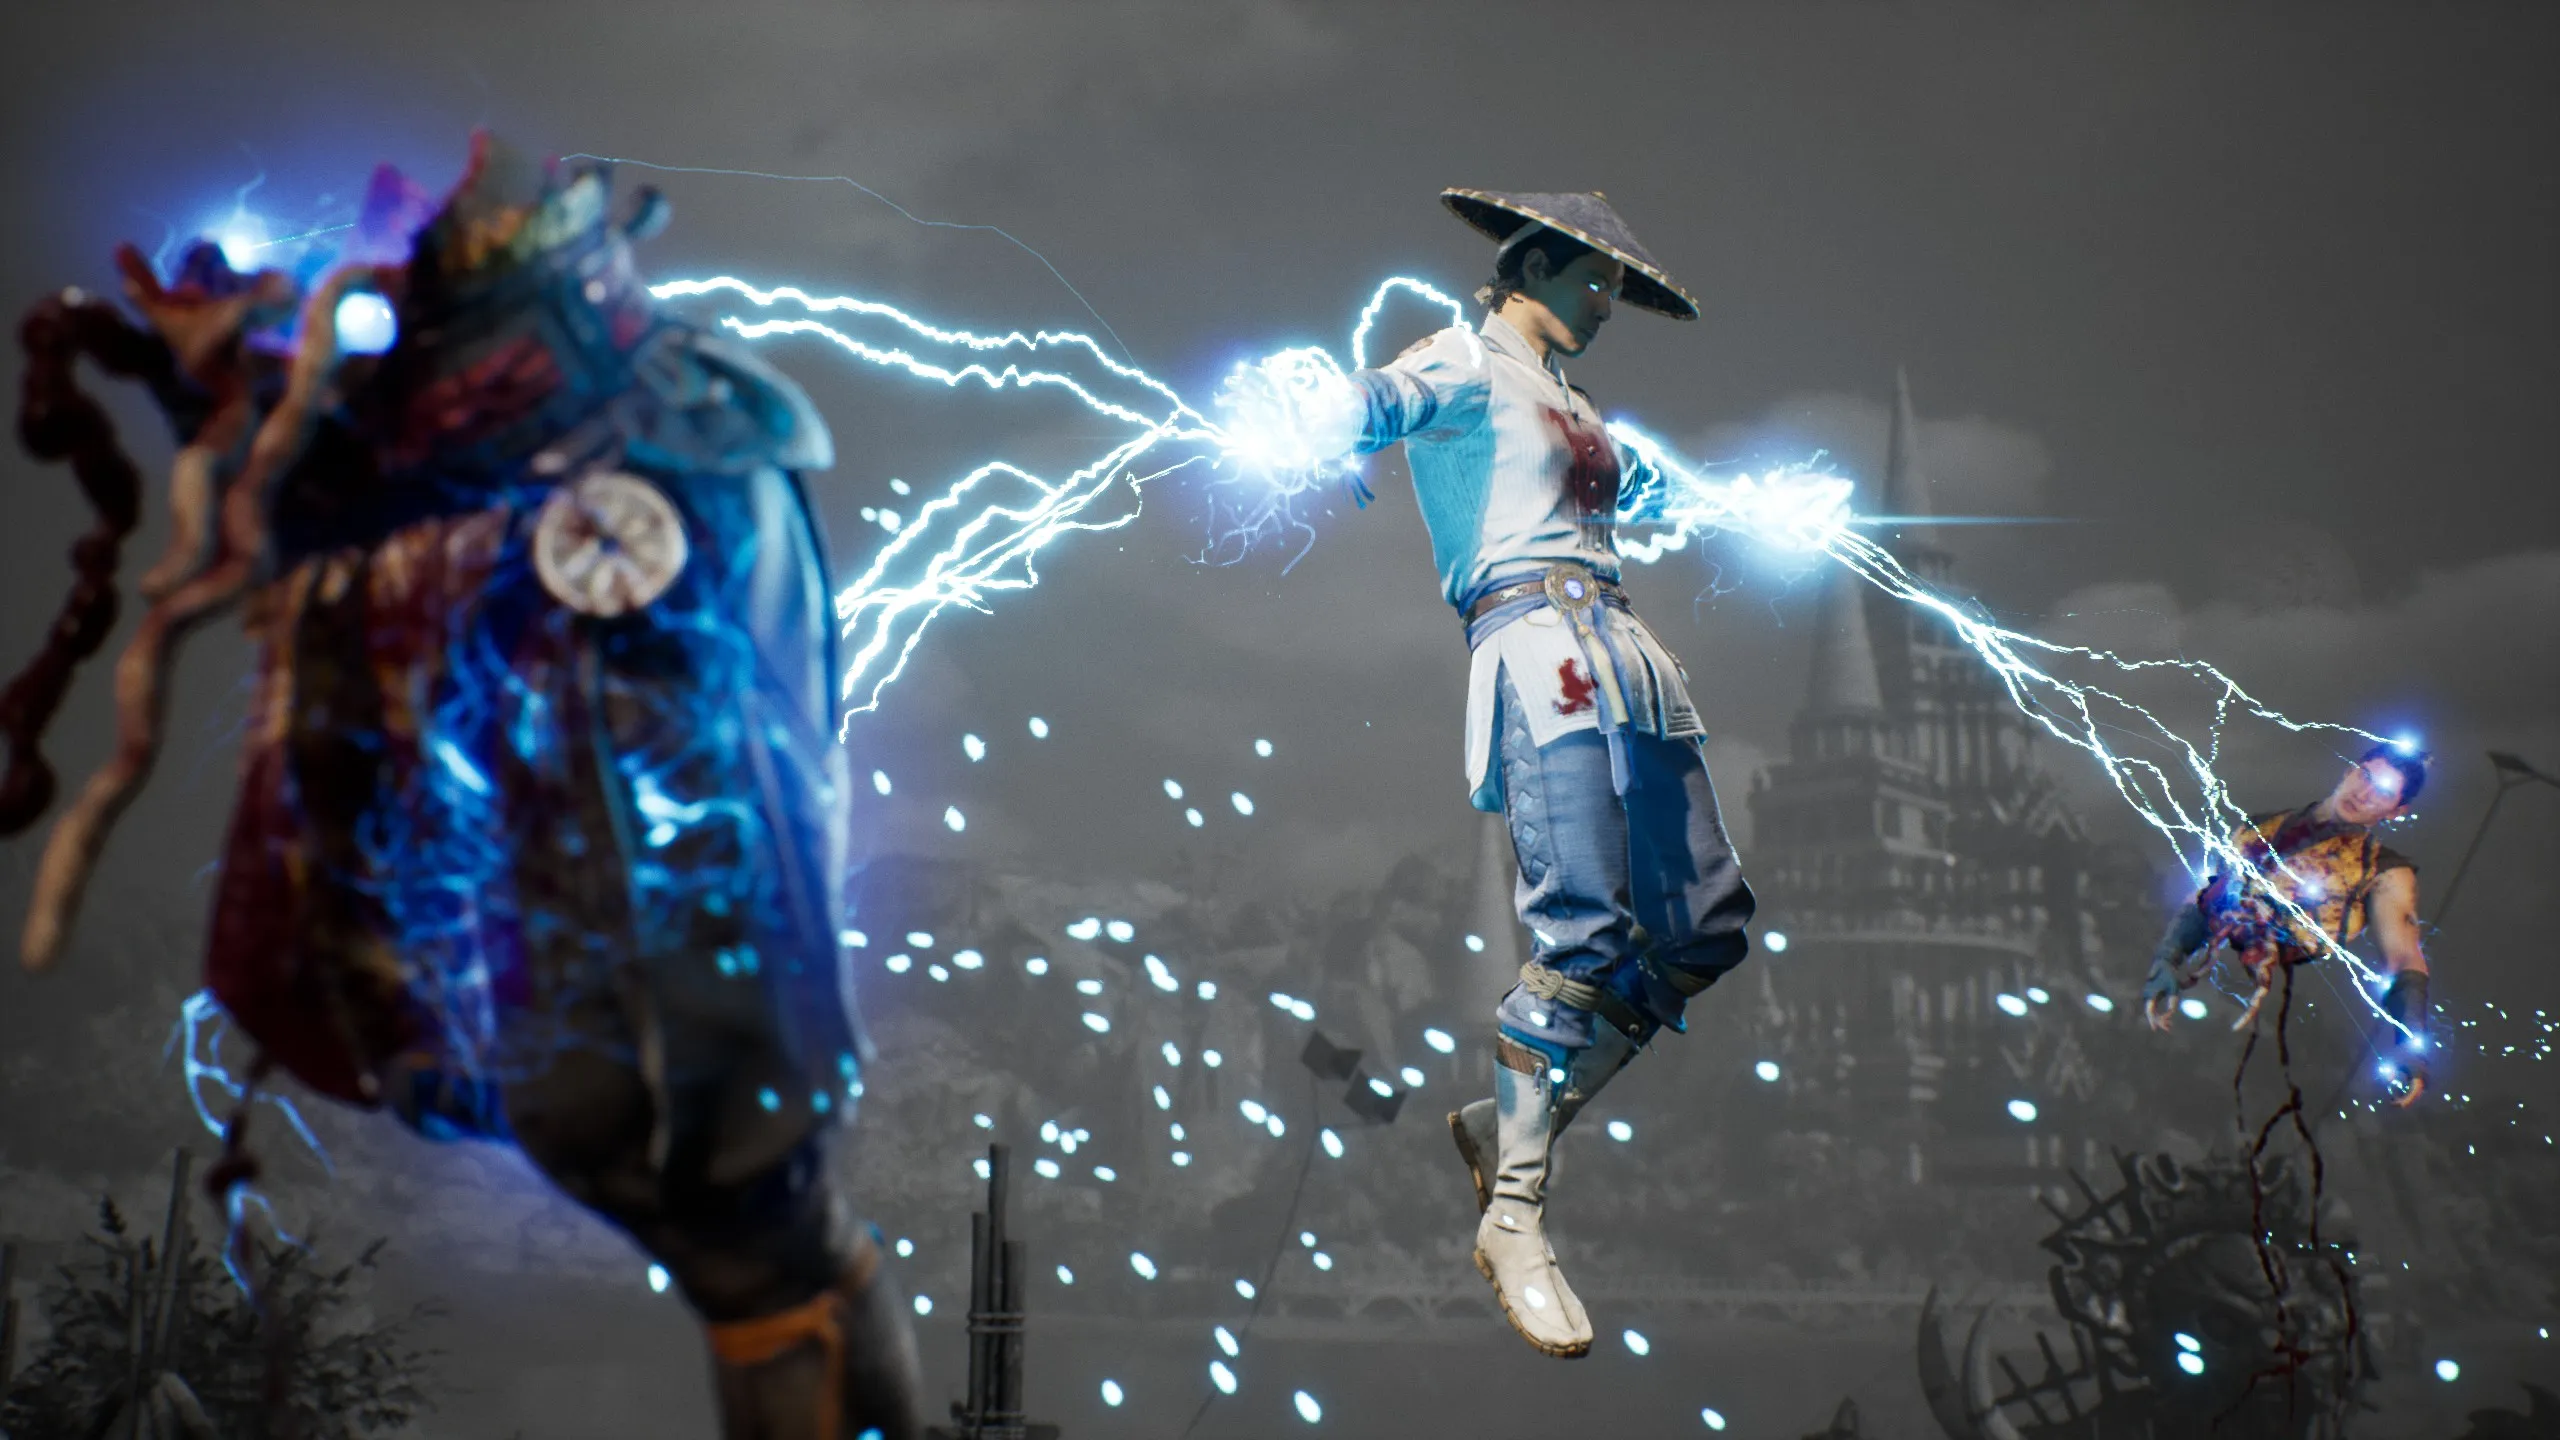 How to Perform All of Sub-Zero's Fatalities in Mortal Kombat 1